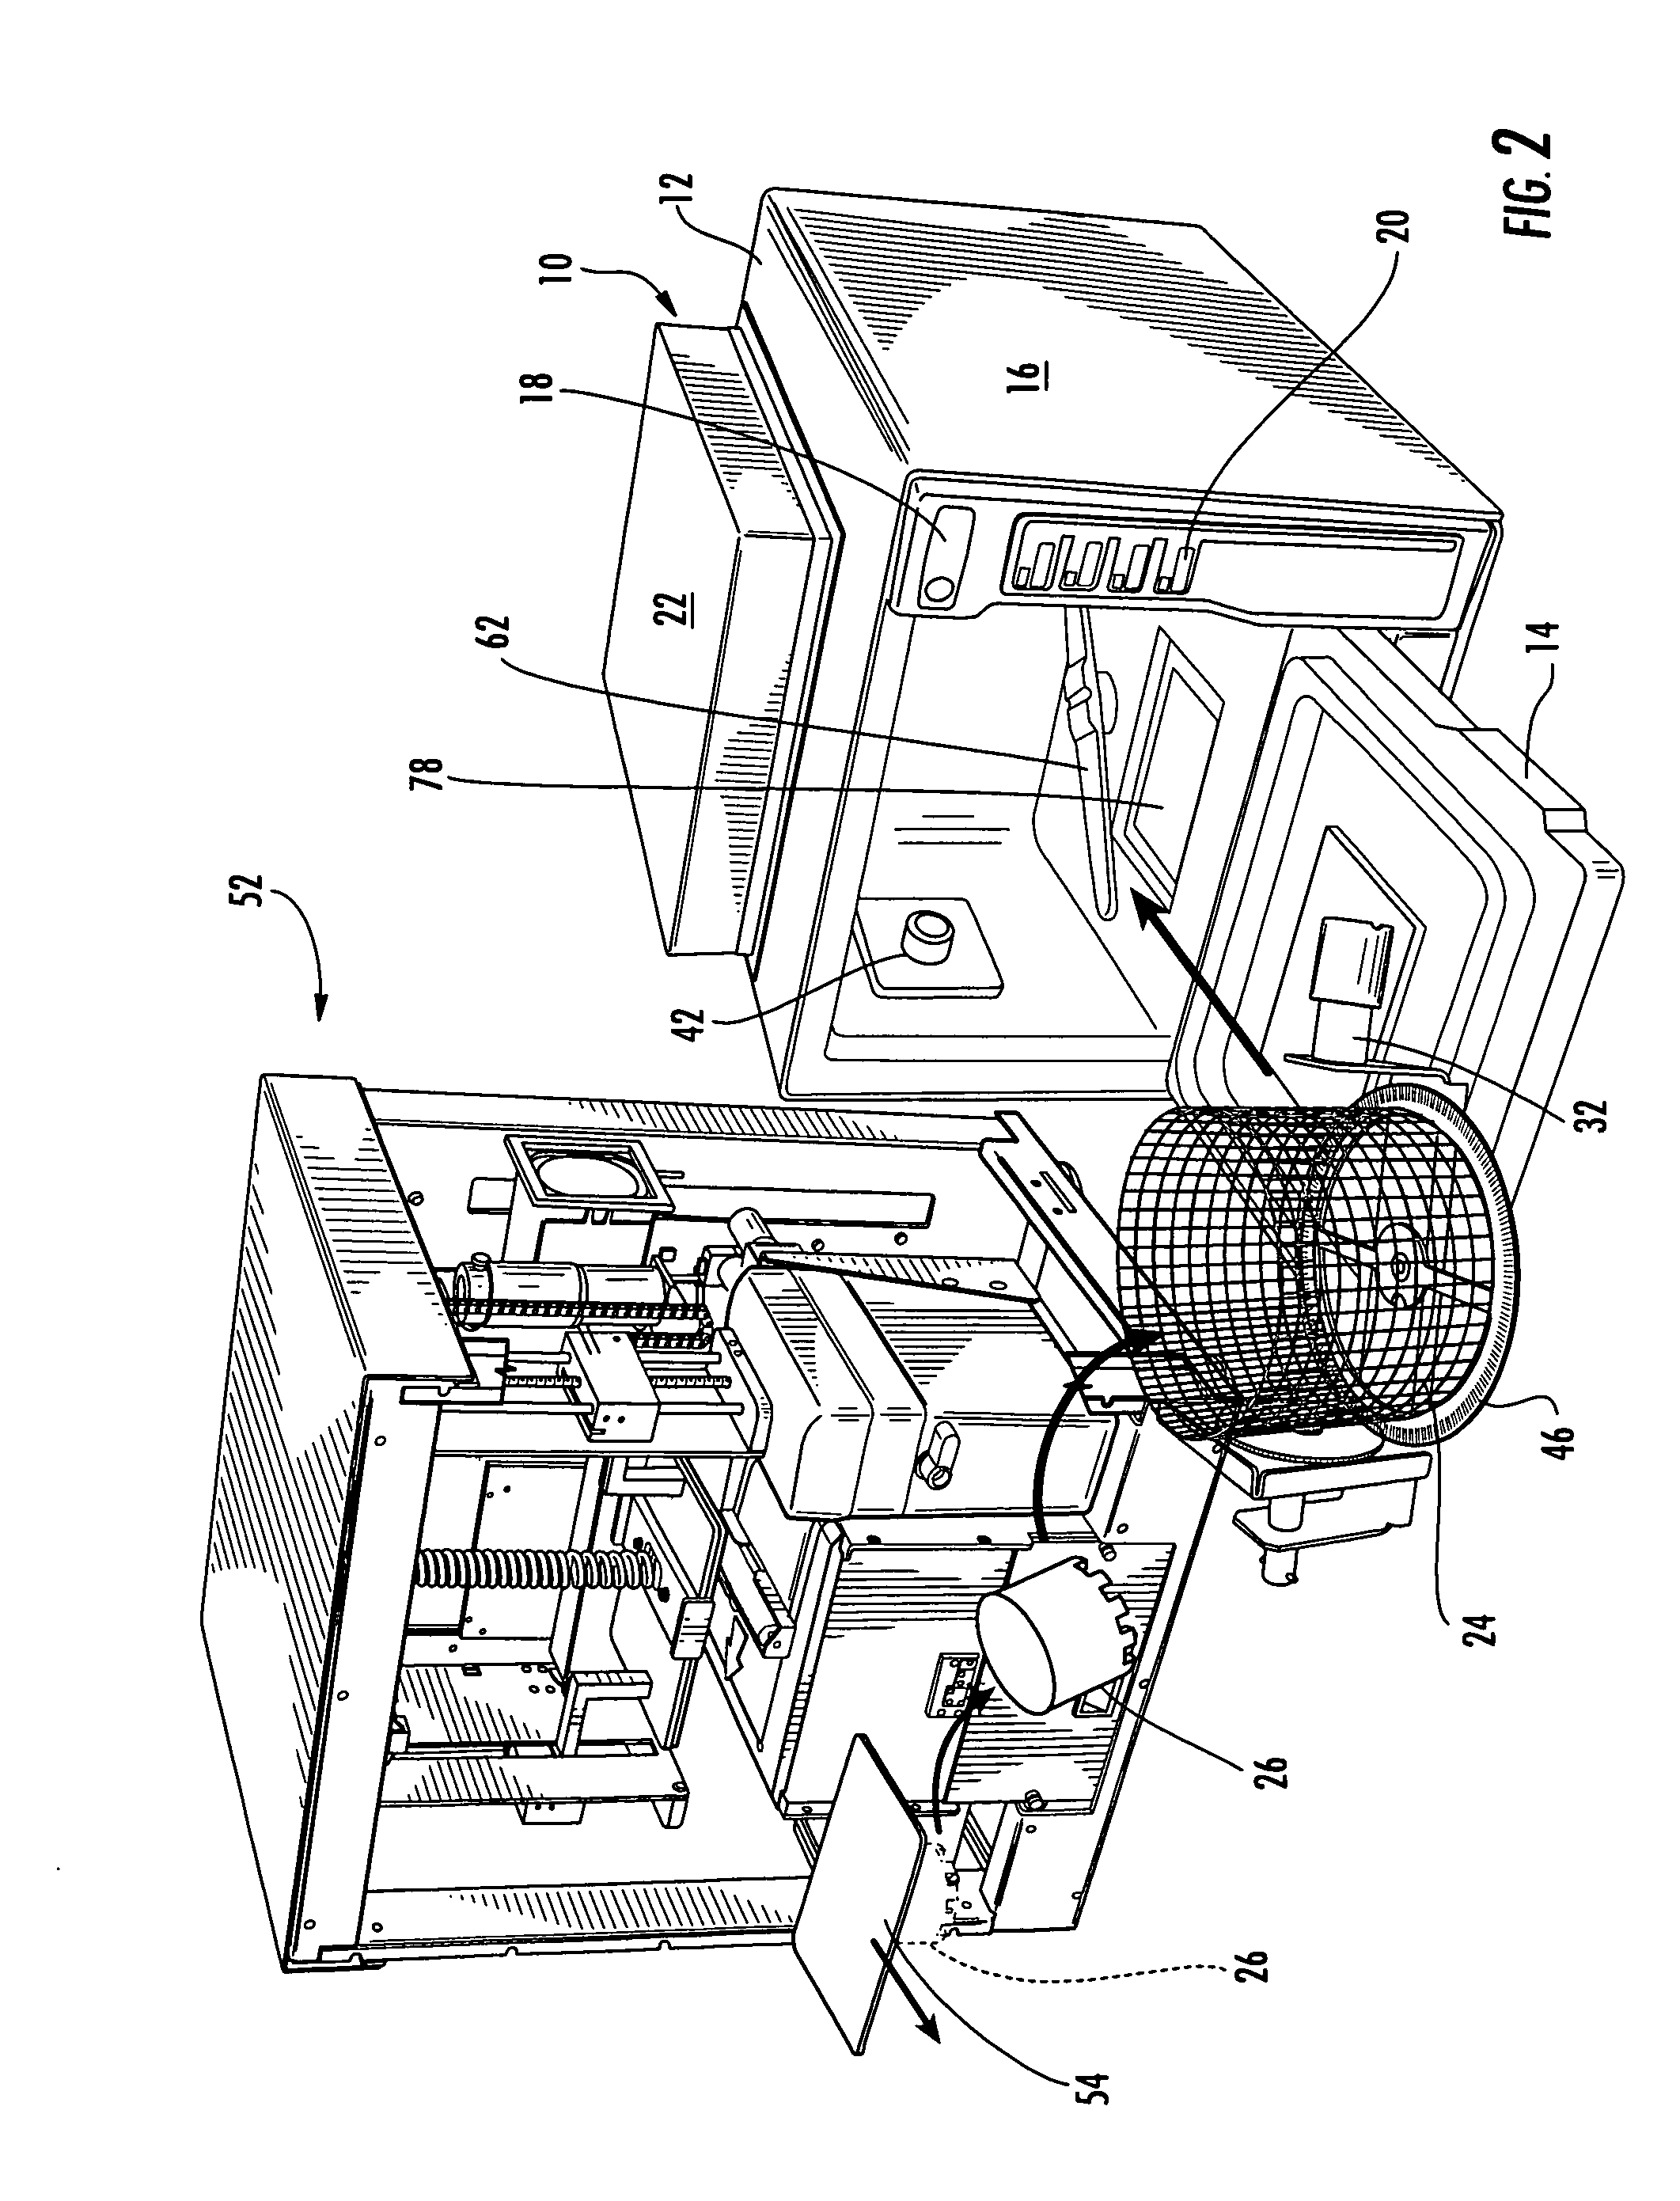 Methods for Cleaning and Curing Solid Freeform Fabrication Parts